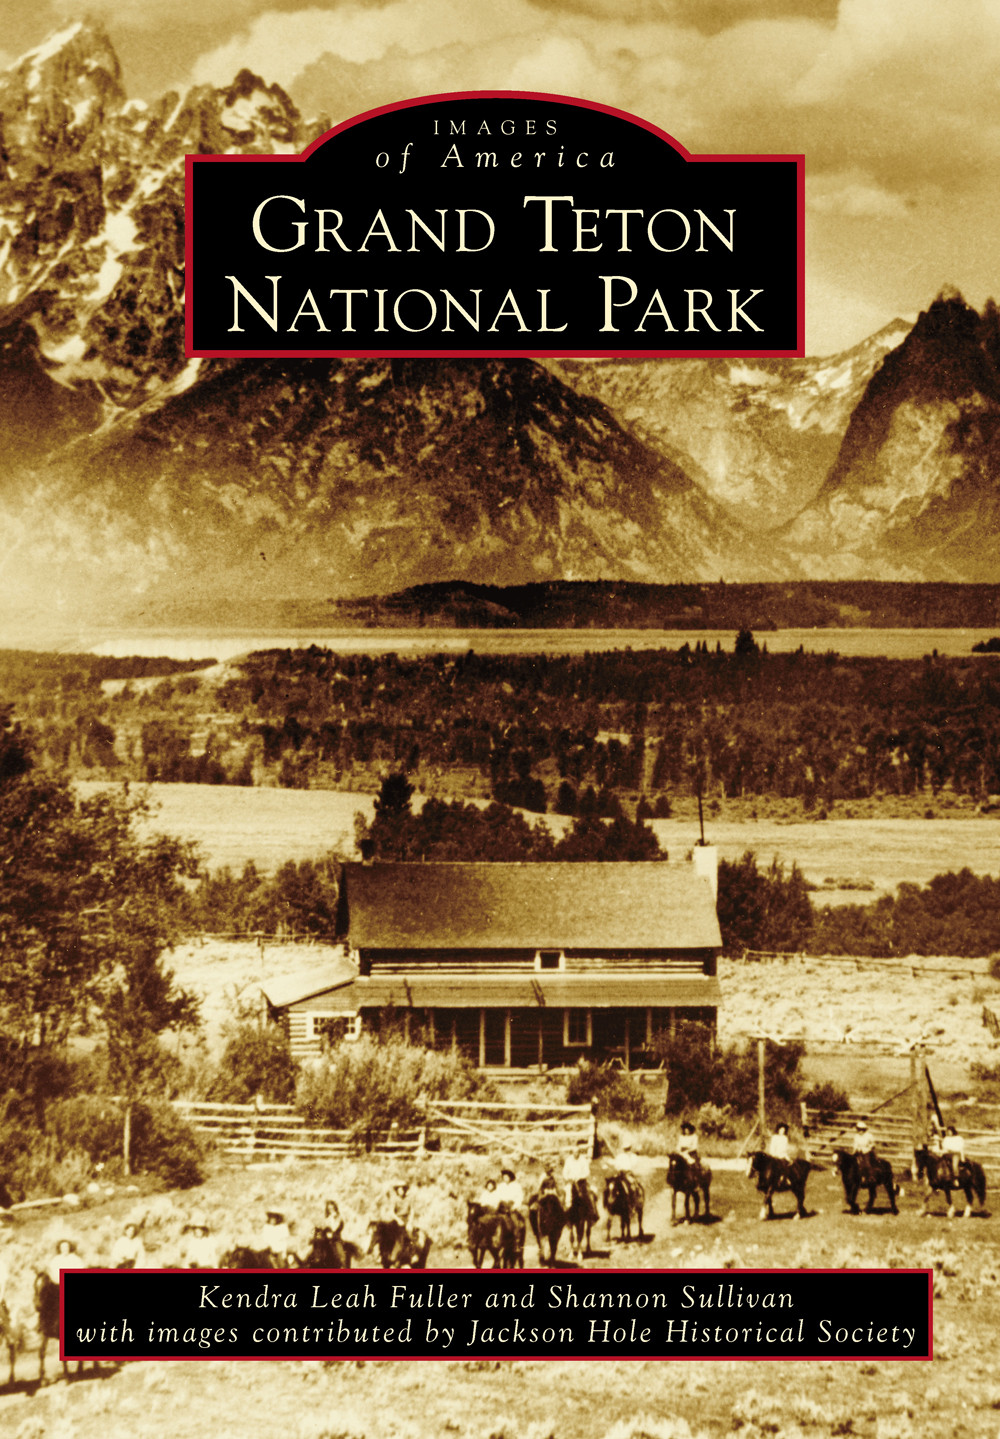 IMAGES of America GRAND TETON NATIONAL PARK In this image from the 1920s - photo 1